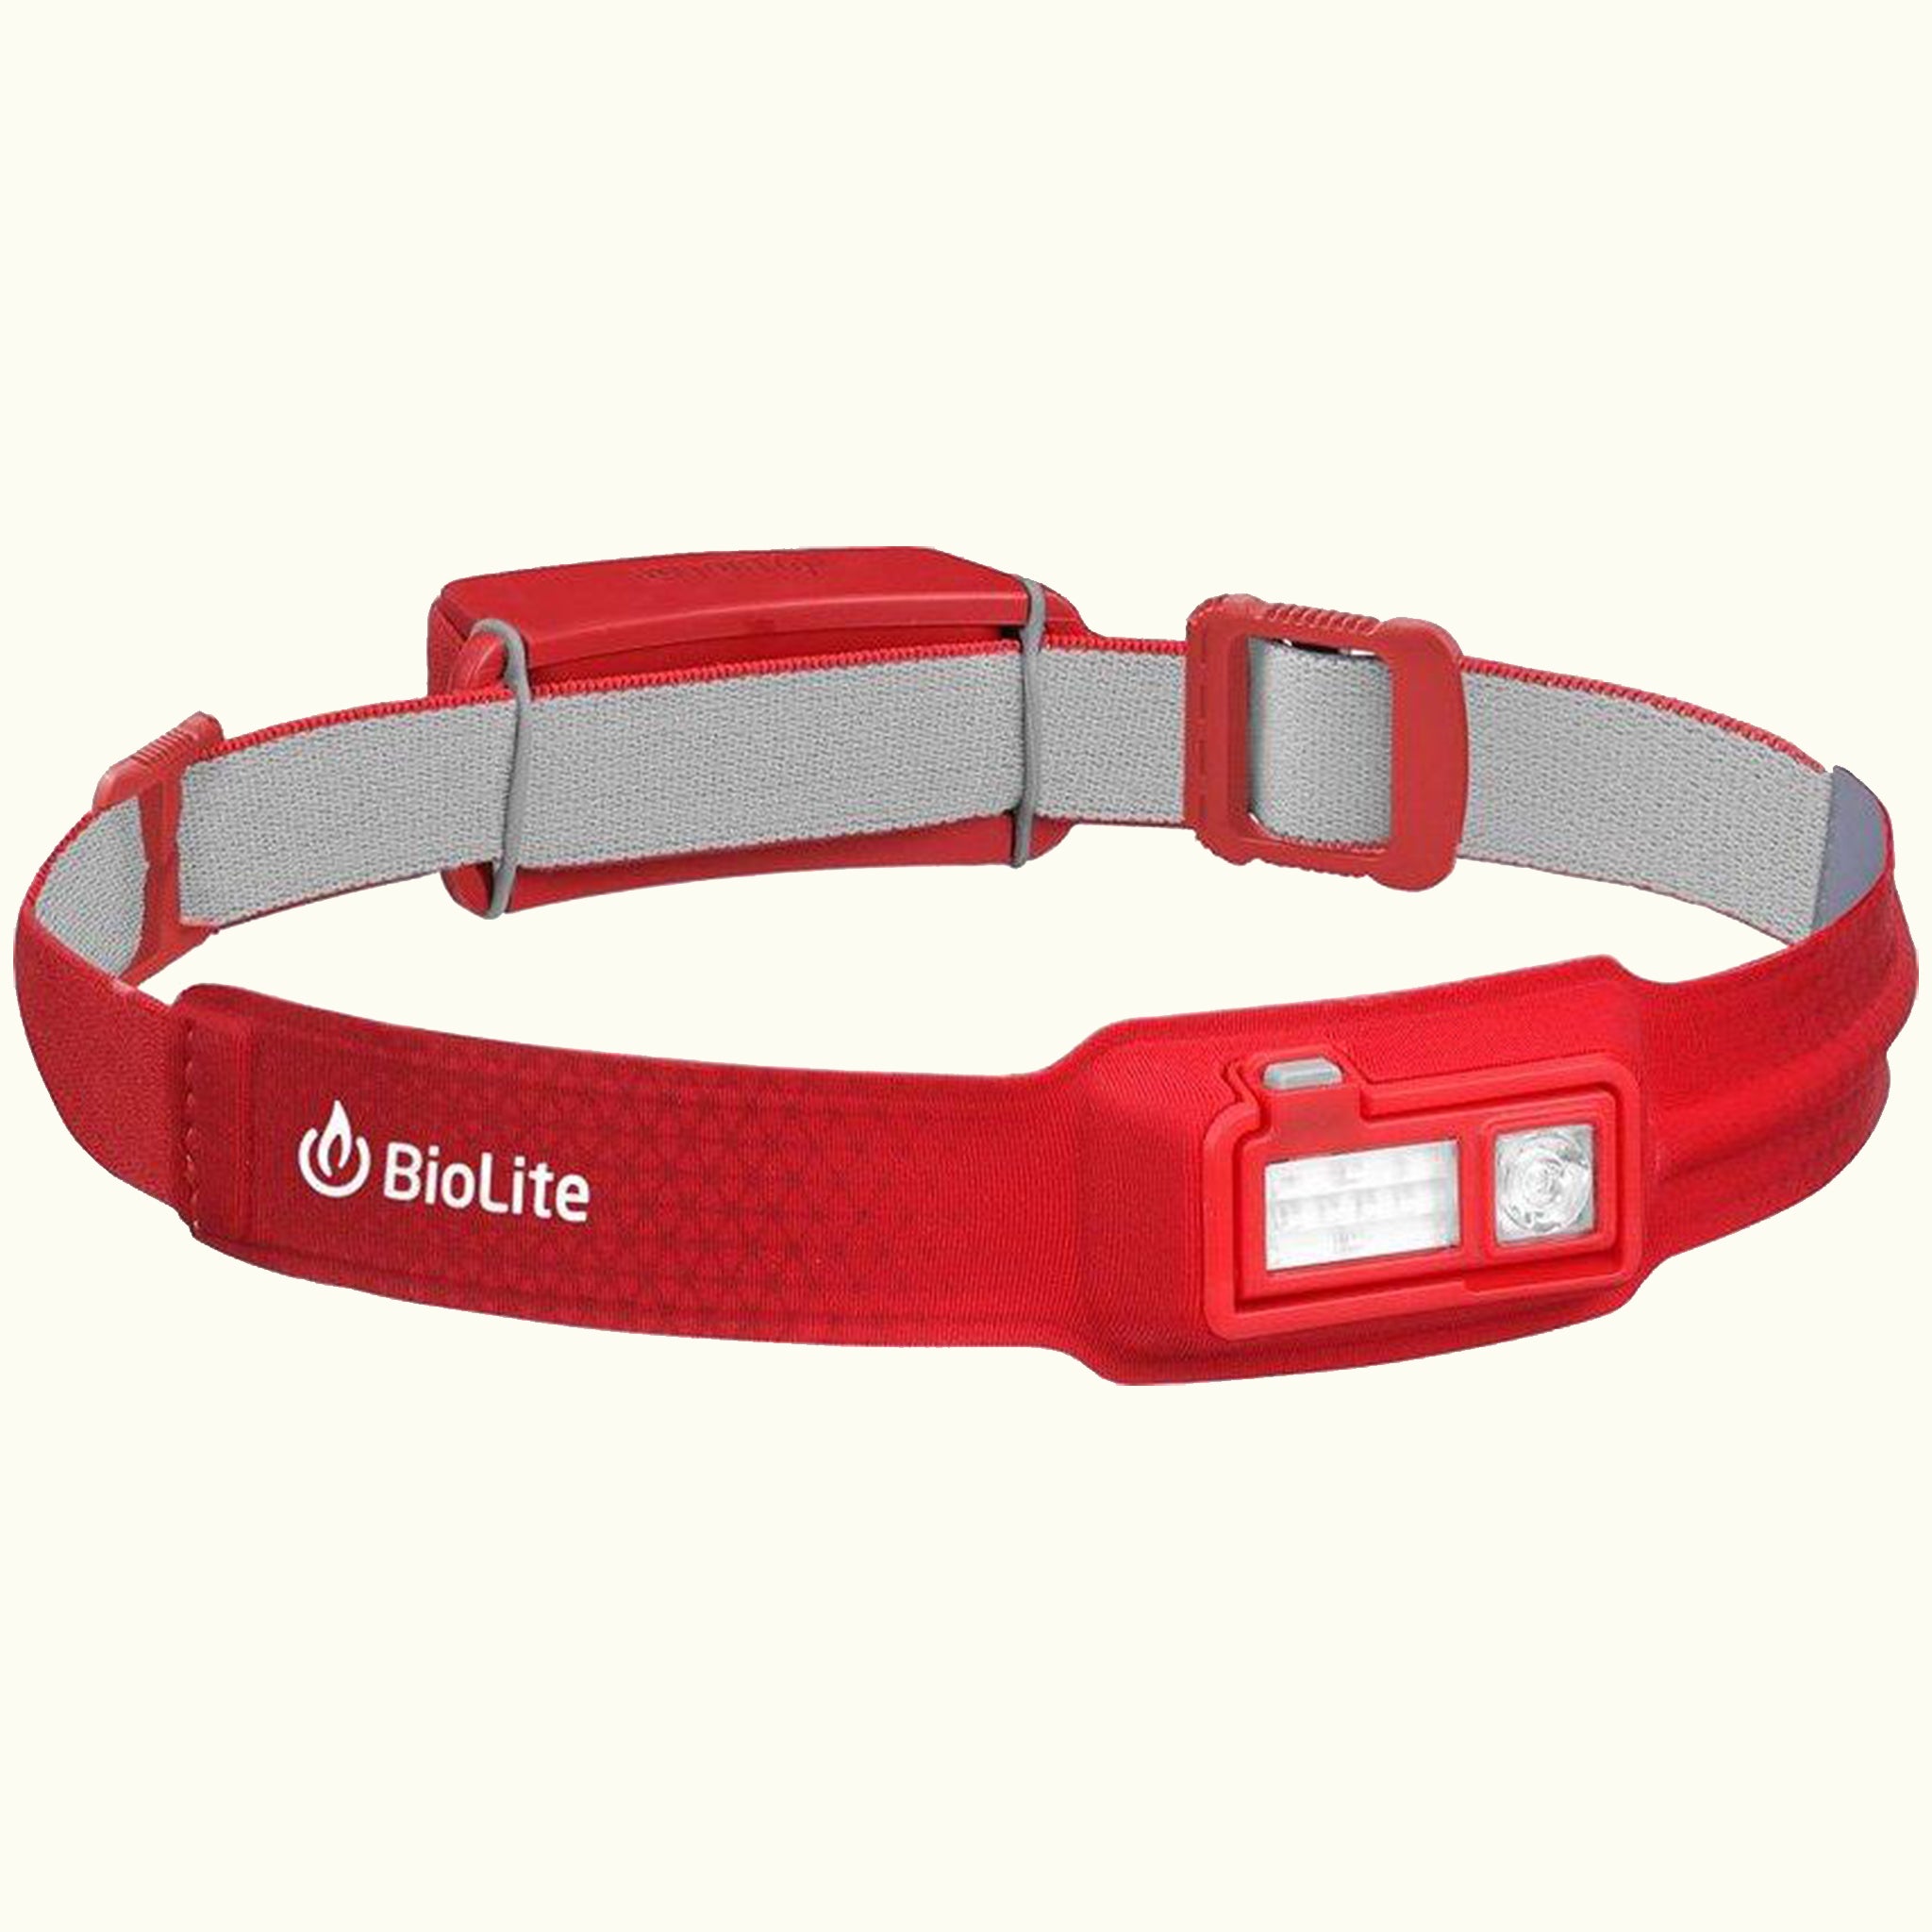 BORUIT G7 Lampe Frontale, Lampes Frontales LED Rechargeable, 2 Pièces  Frontale Rouge USB Capteur Lampe Frontal Rechargeable IPX6 Étanche pour  Randonnée, Camping, Peche, Running : : Sports et Loisirs